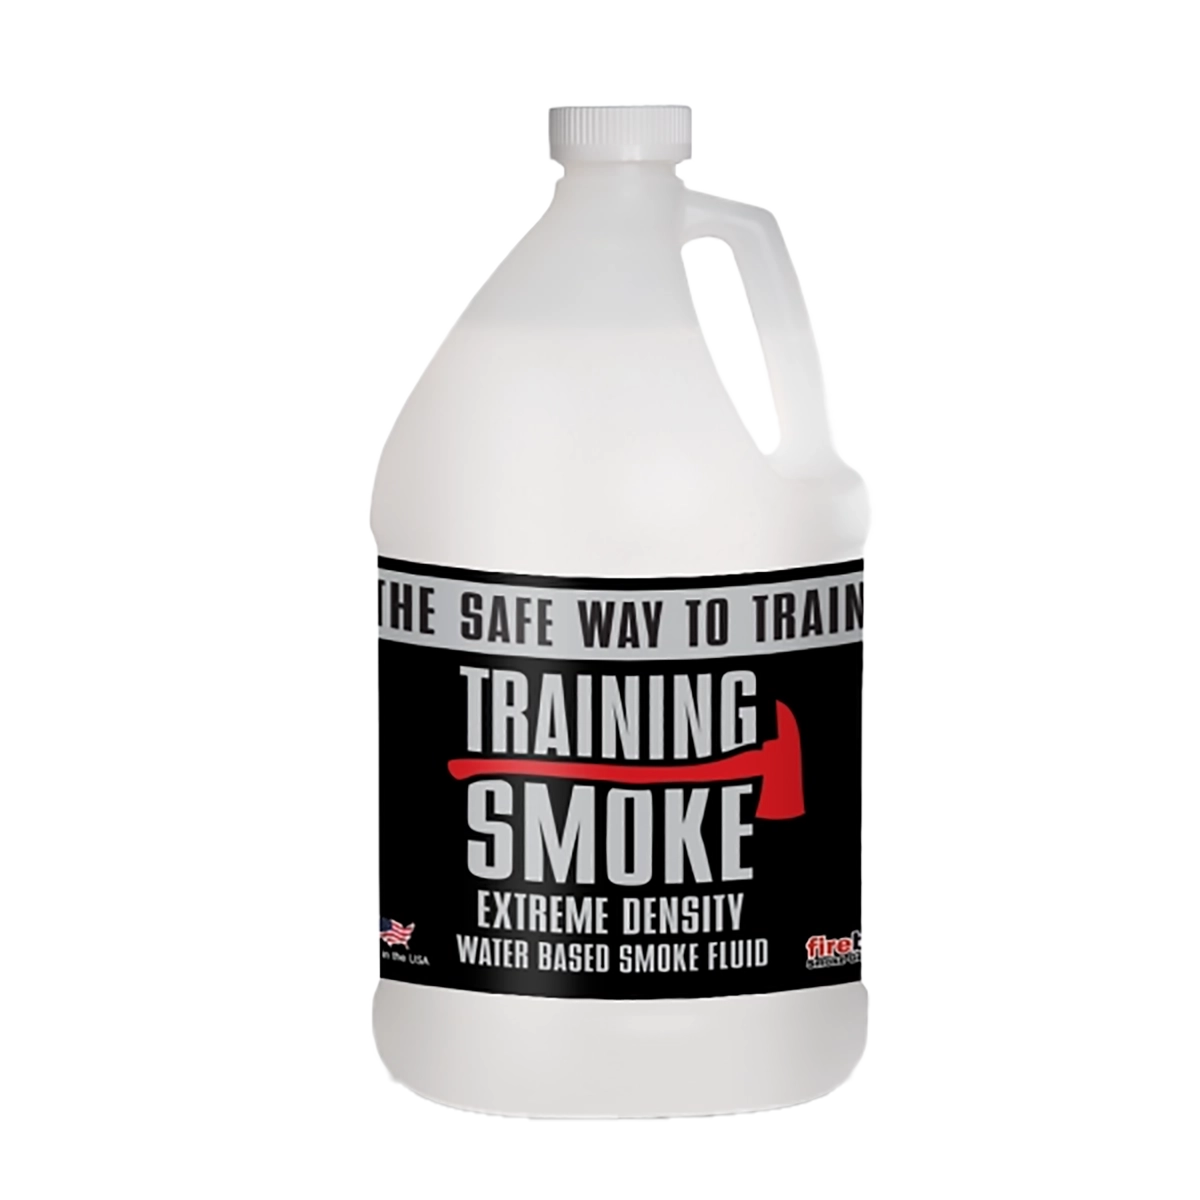 Training Smoke XD-Extreme density fire & rescue fog water based, Gallon